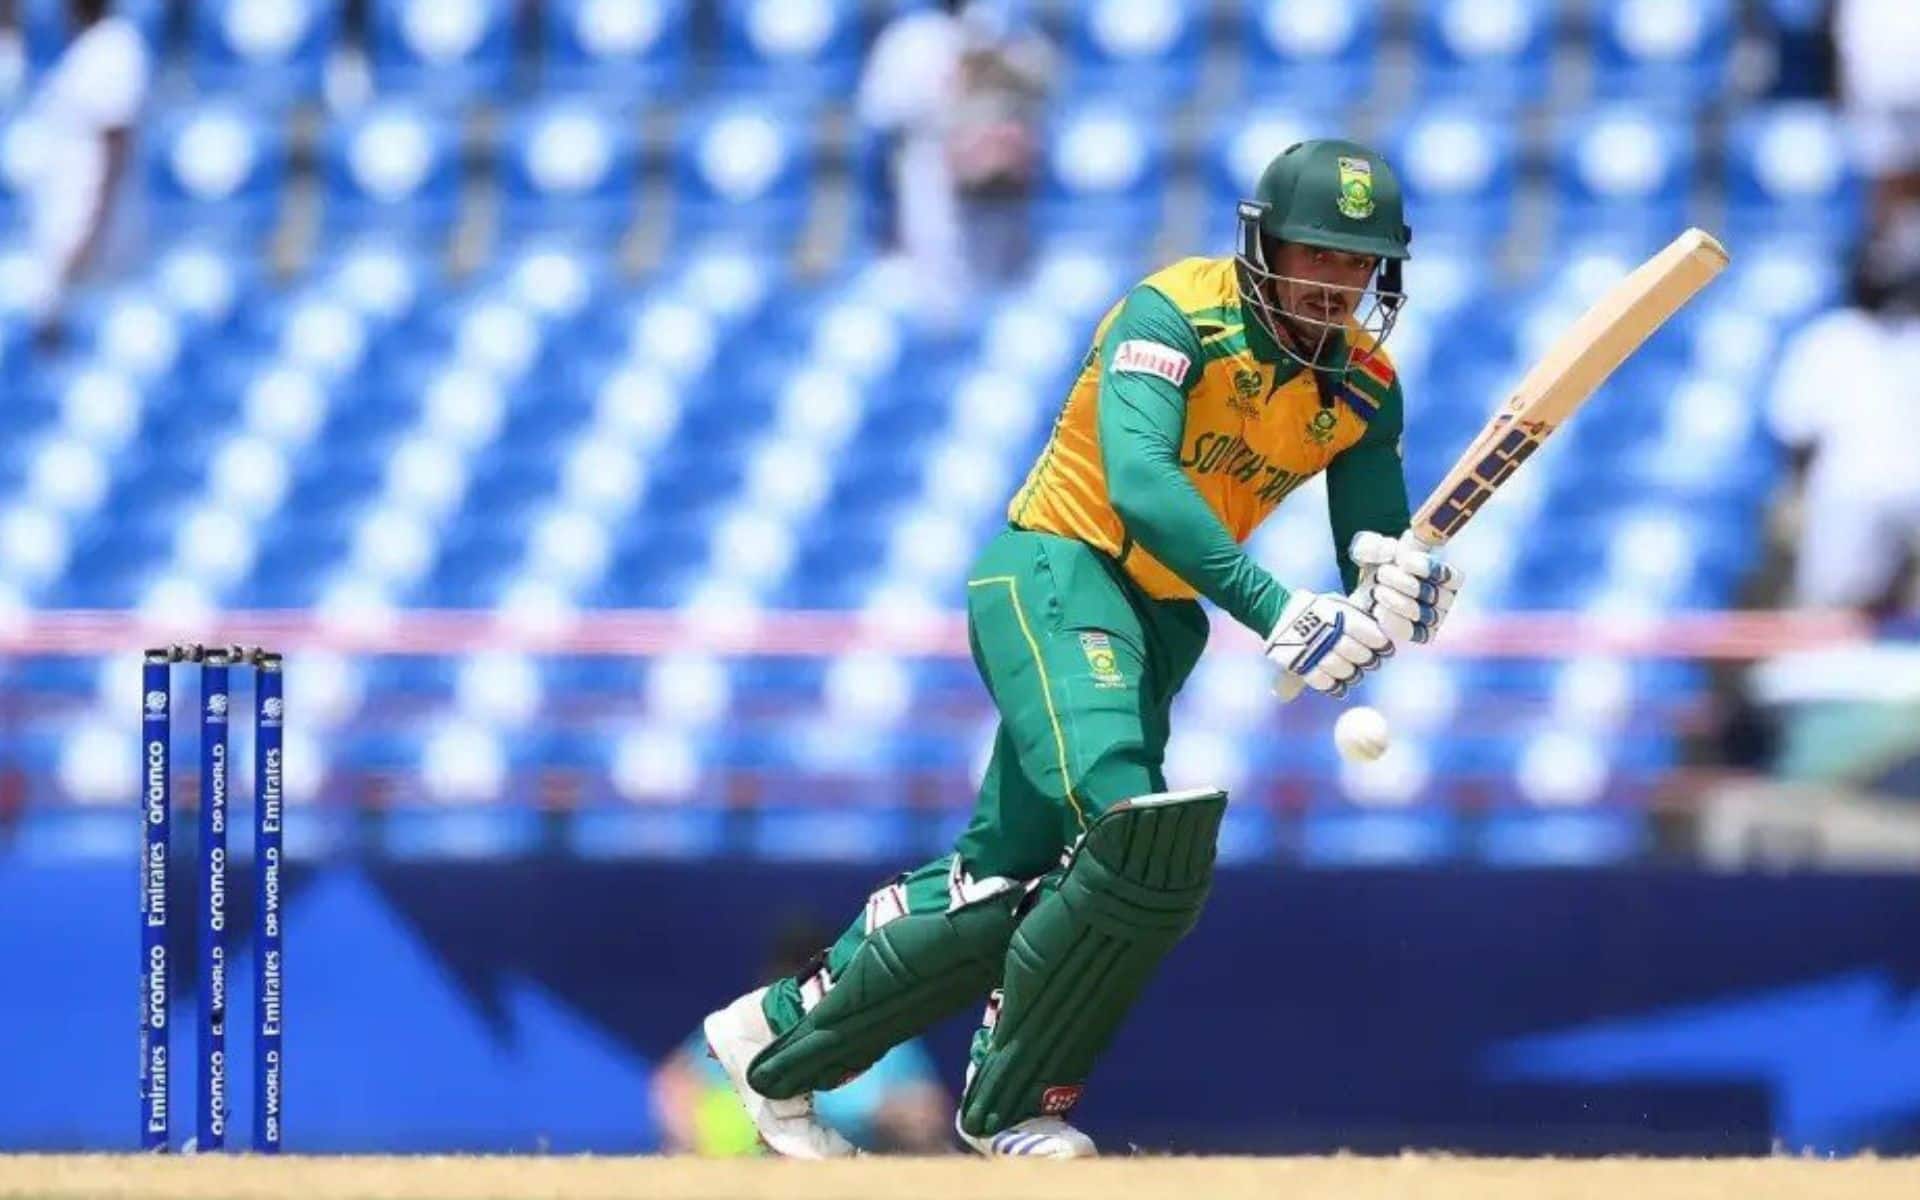 Quinton de Kock can be a match-winner for the Seattle Orcas [X]